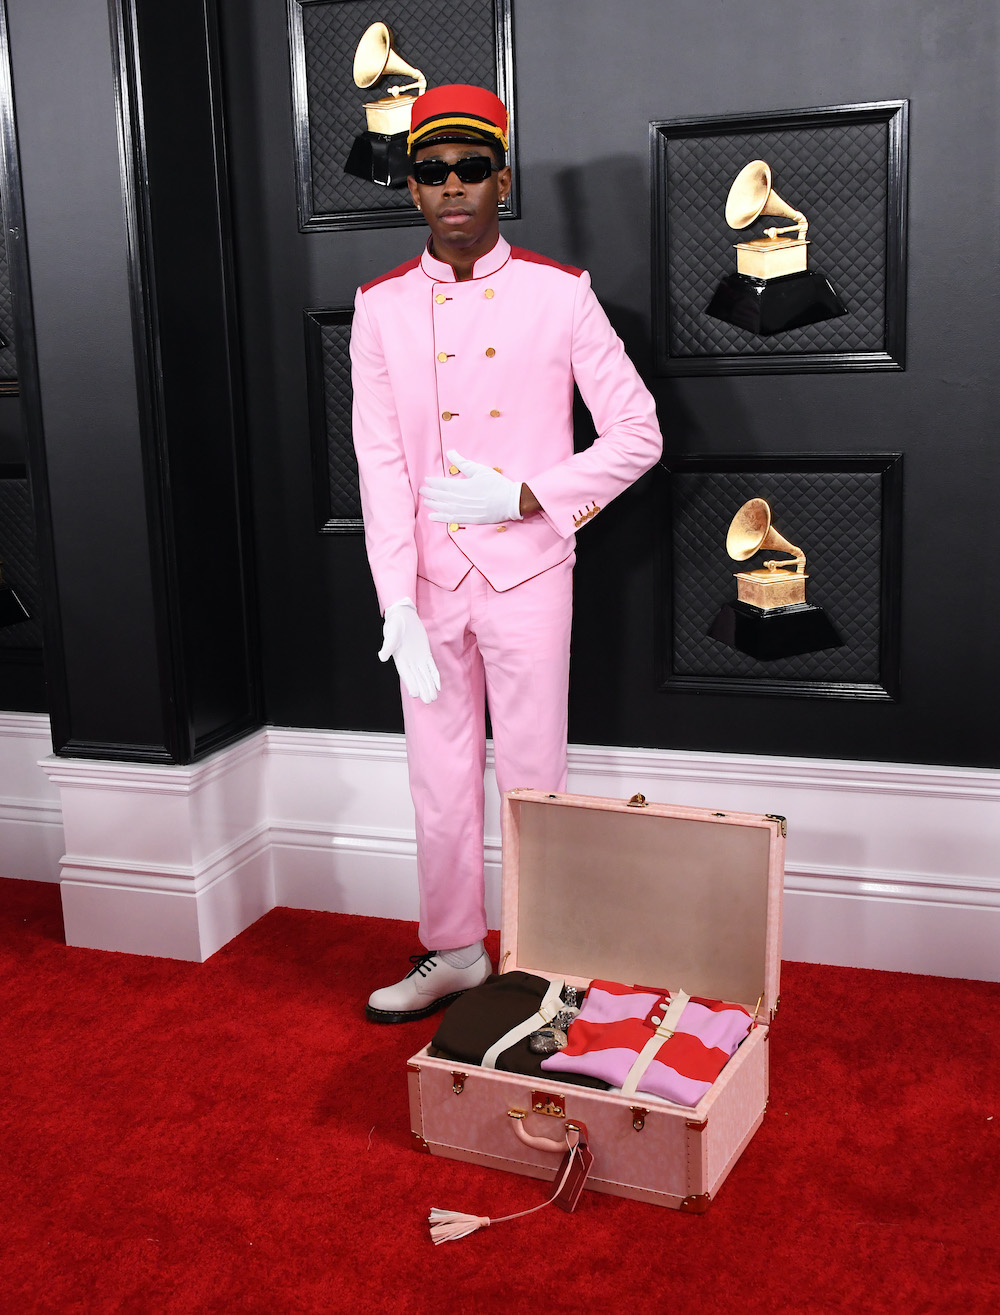 Tyler, the Creator at the red carpet for the Grammy Awards in 2020